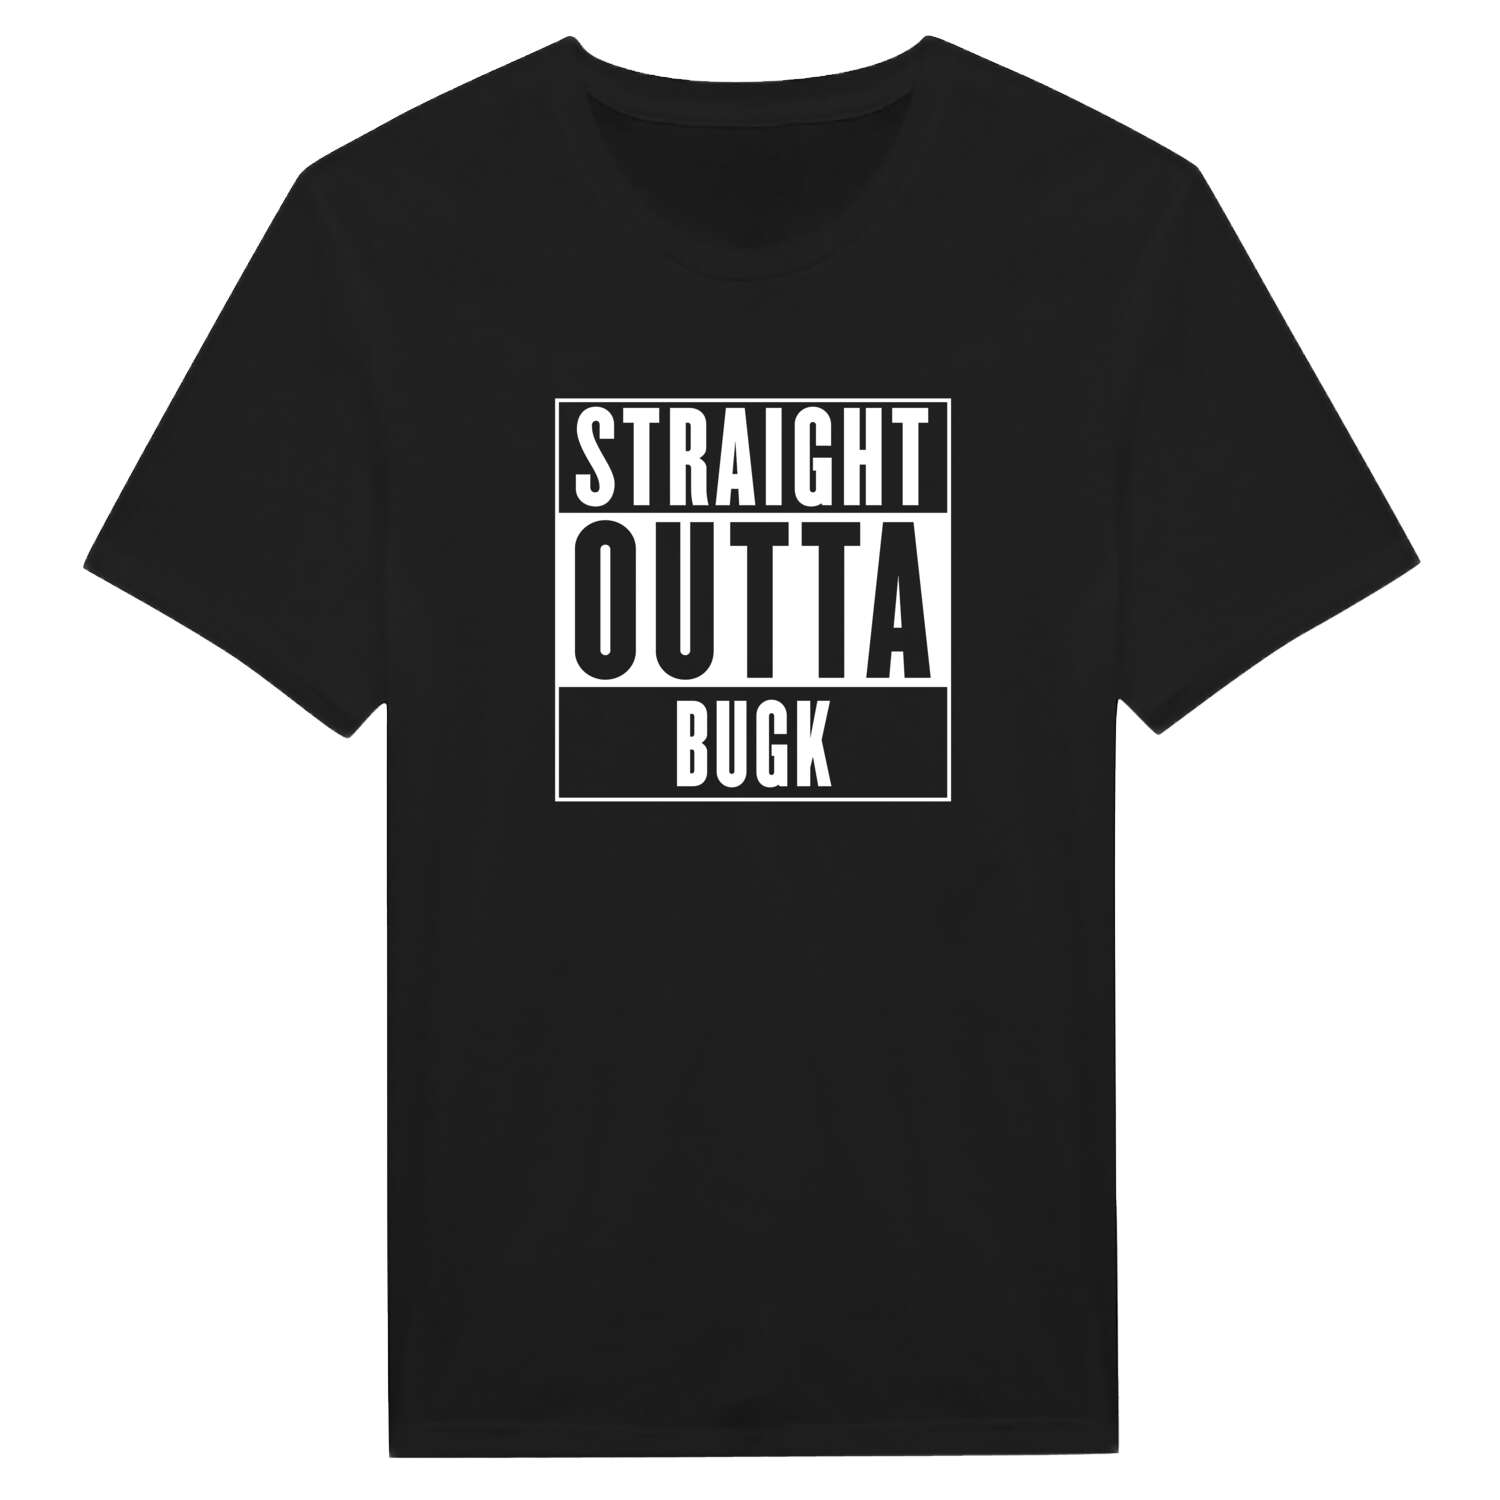 Bugk T-Shirt »Straight Outta«